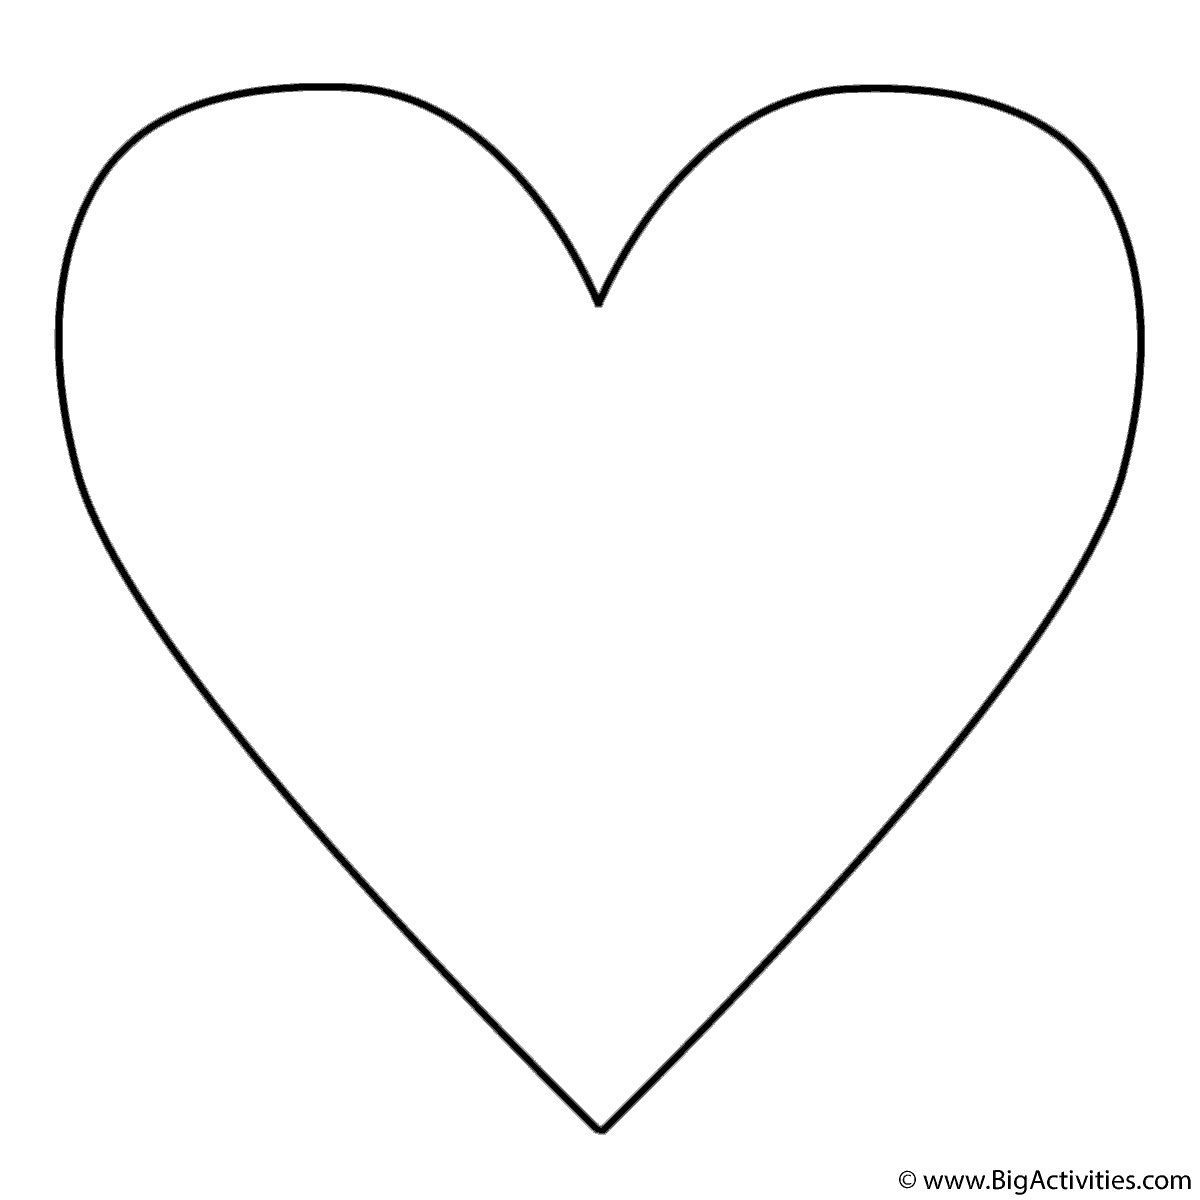 Simple Heart - Coloring Page (Mother's Day)